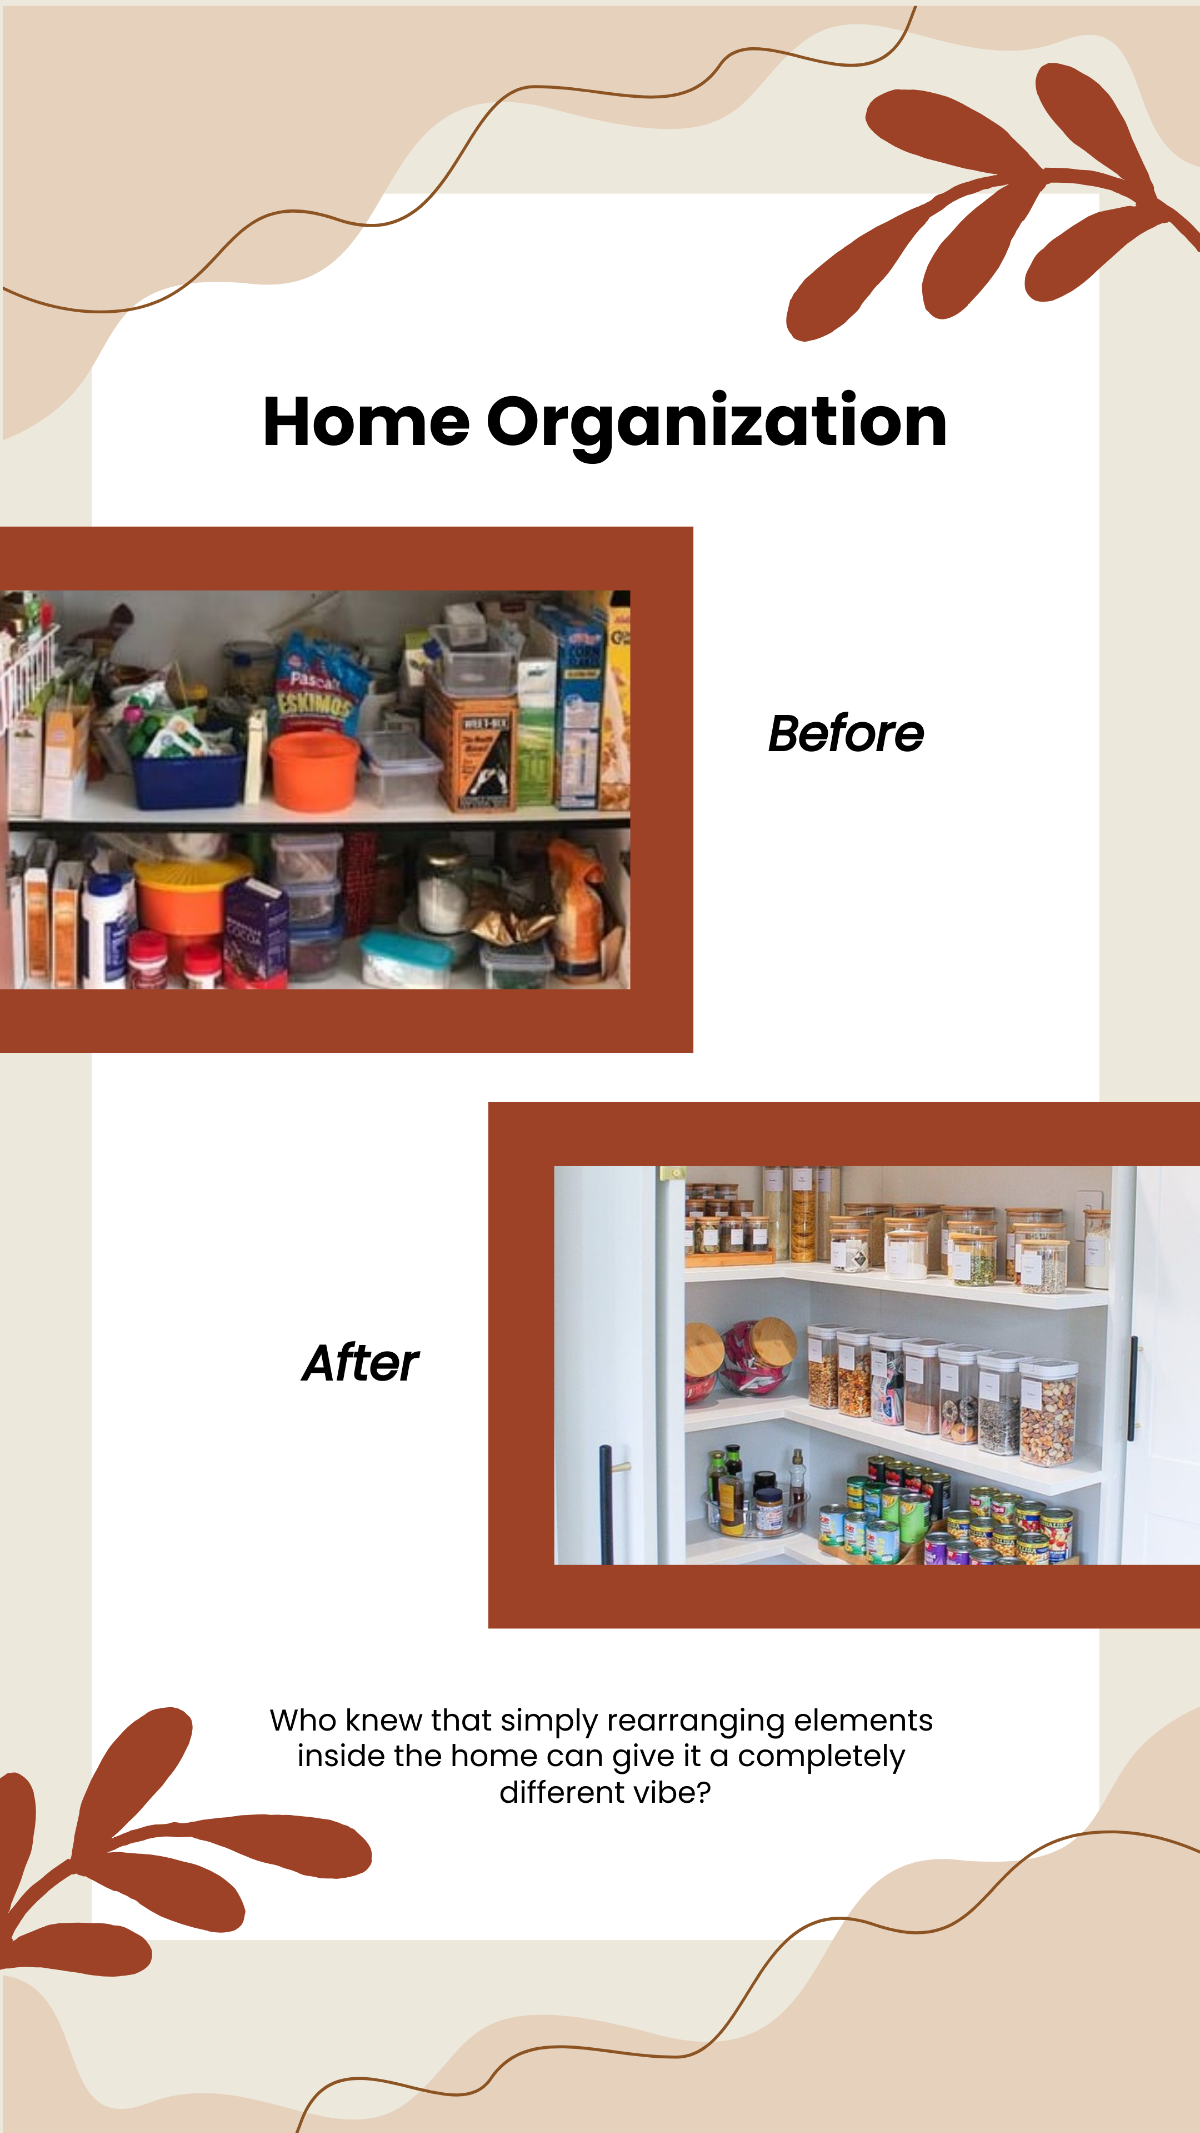 Home Organization Before and After Facebook Post